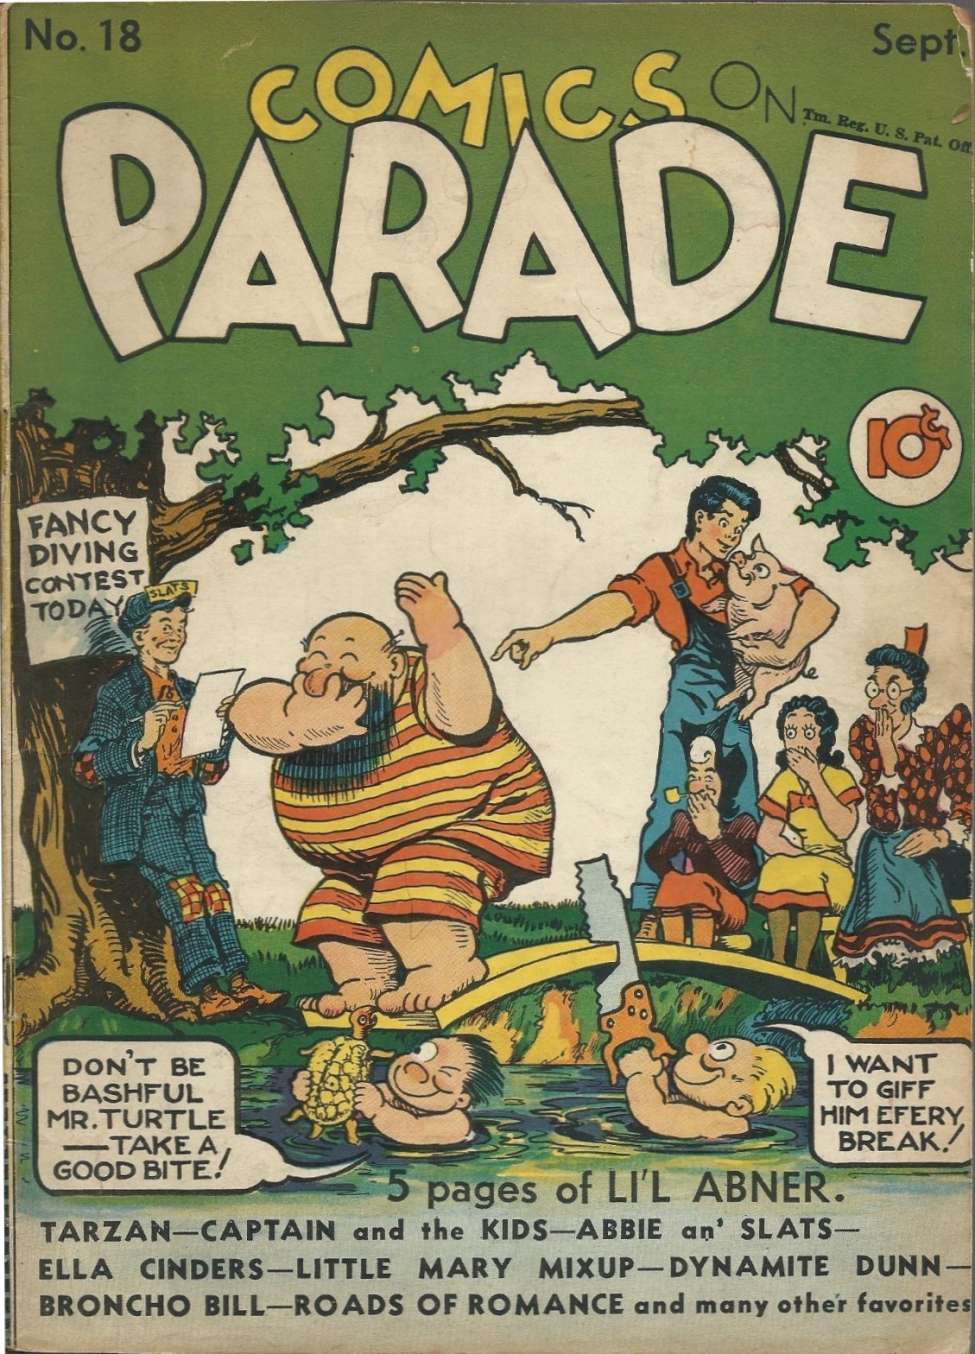 Book Cover For Comics on Parade 18